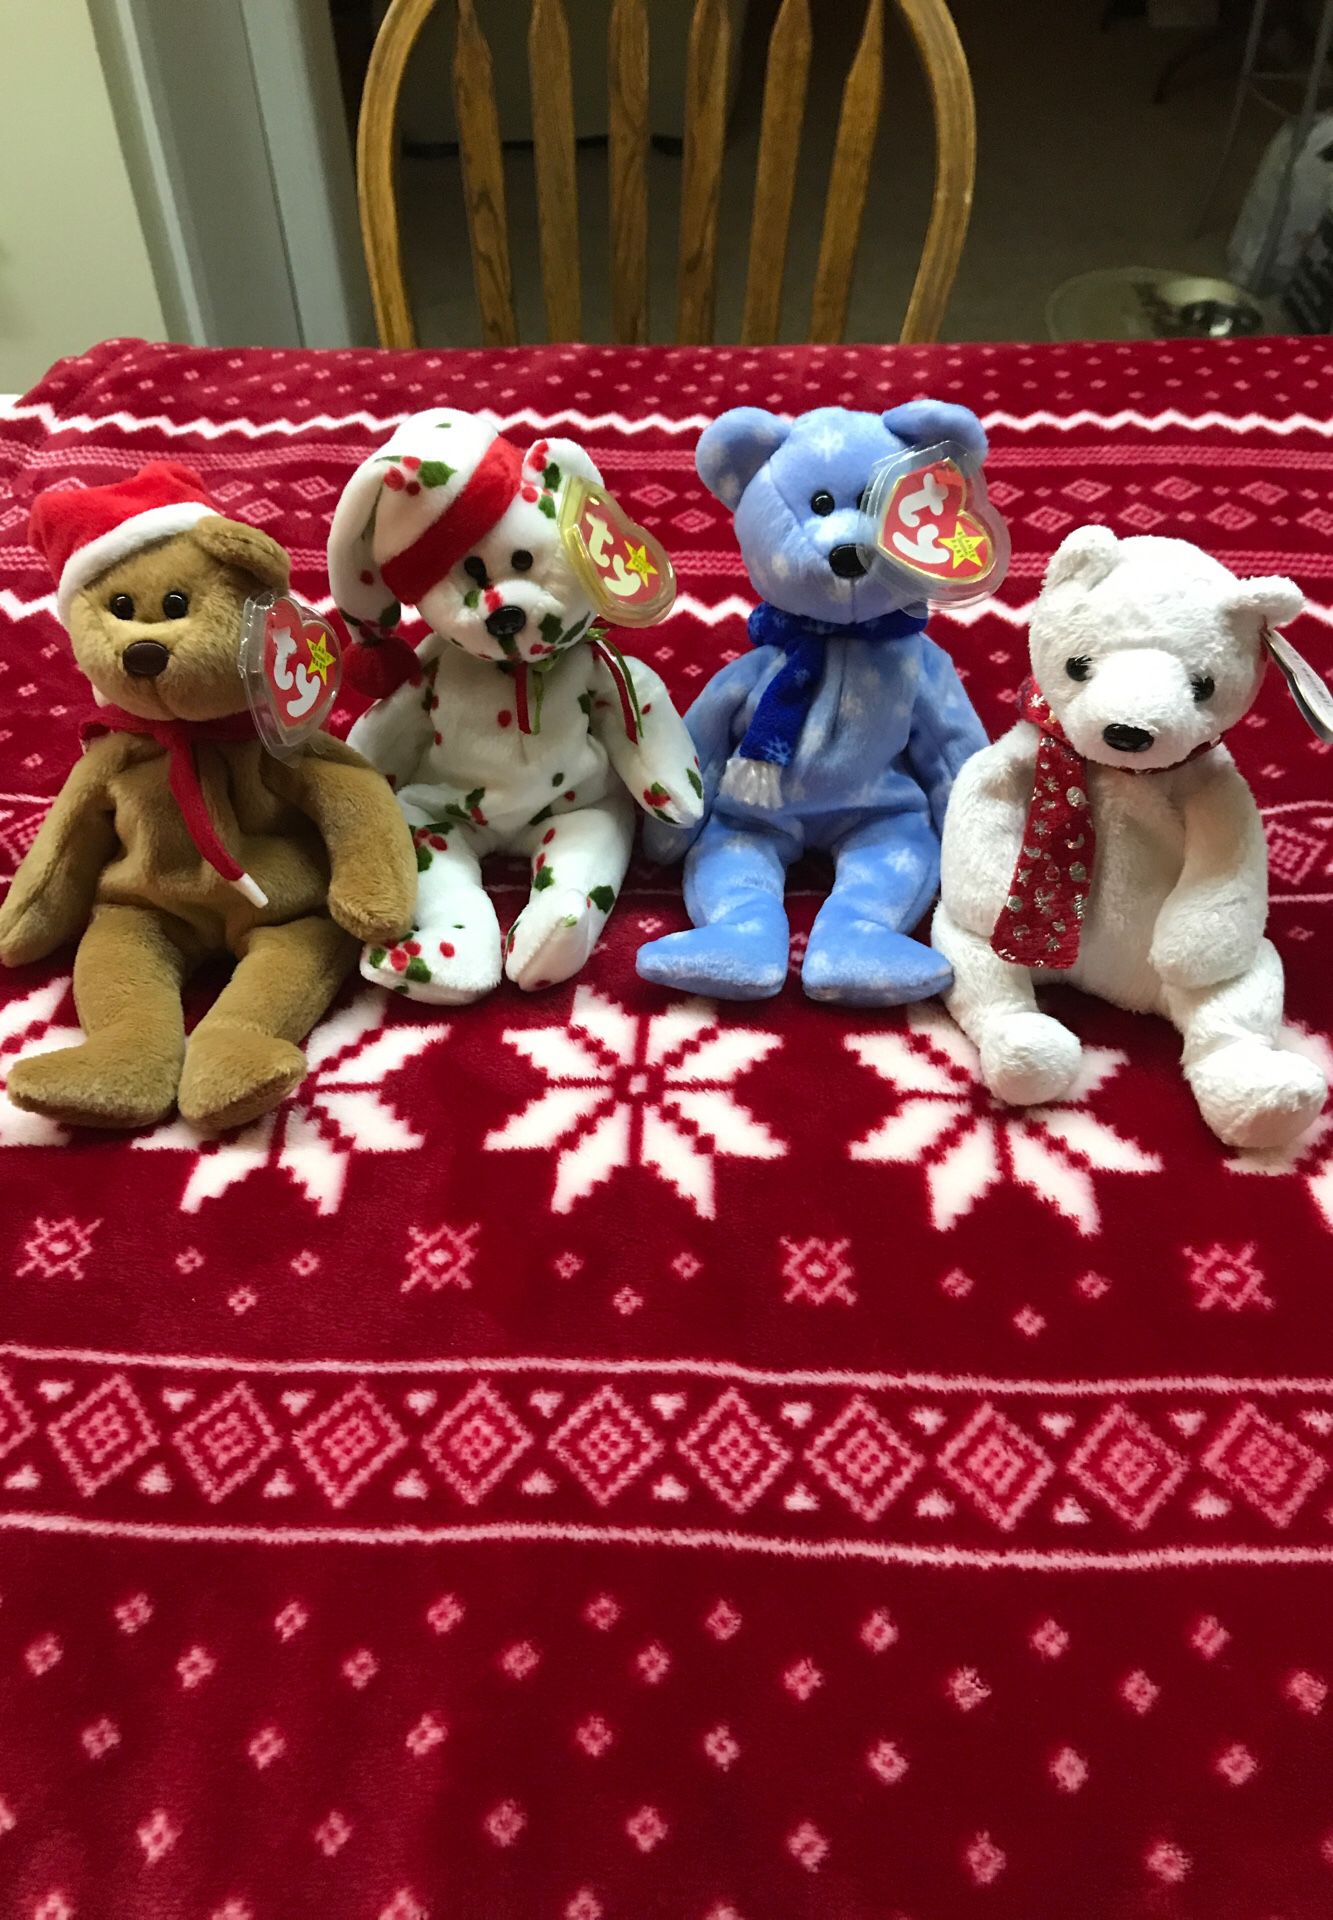 Ty beanie baby set of 4 Holiday Teddy’s 1997,1998,1999,2000 Mint Condition